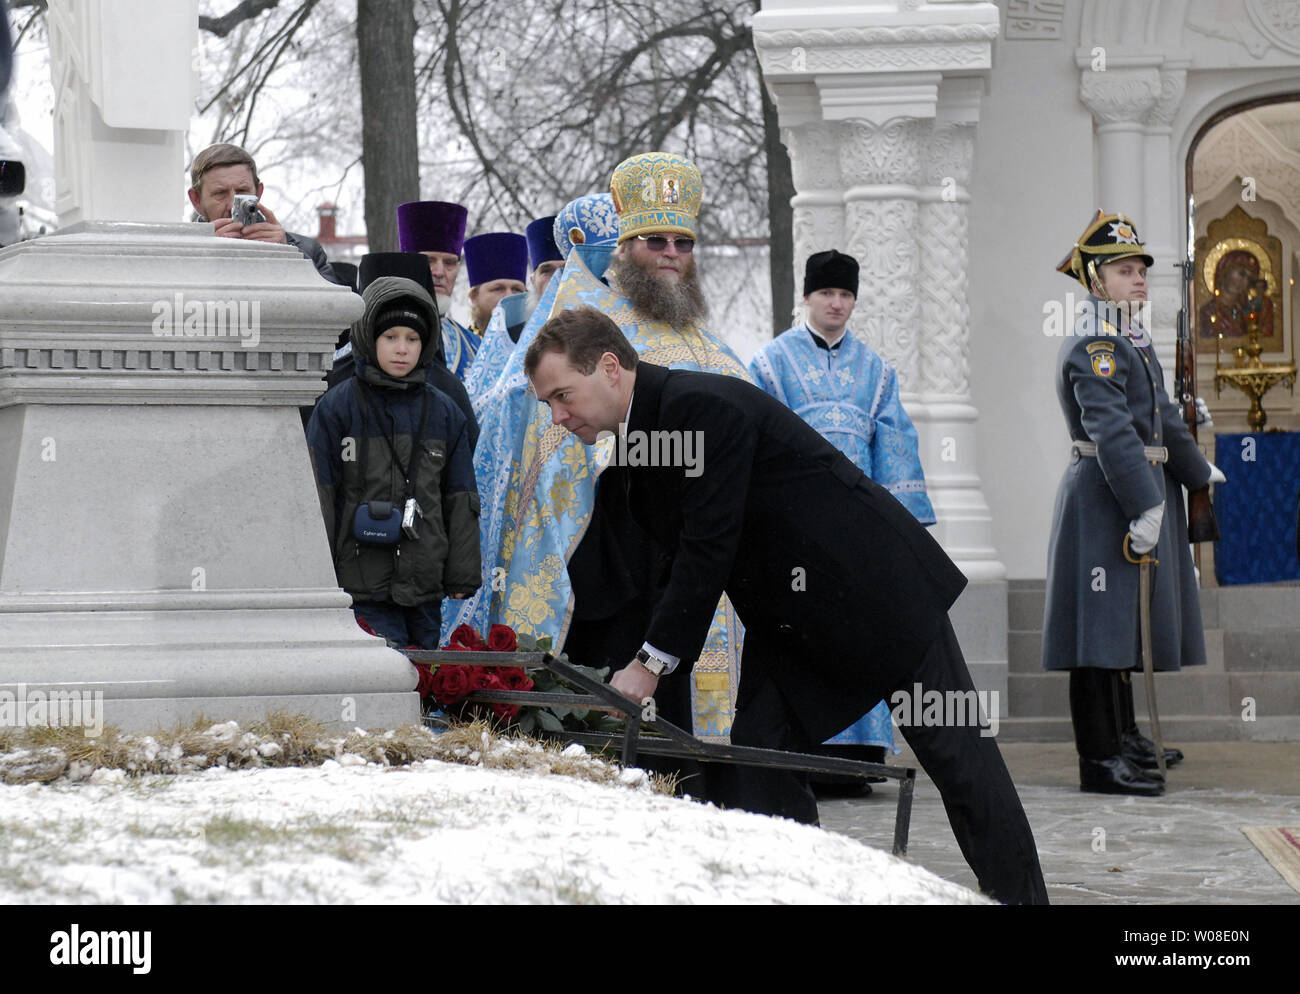 Russian President Dmitry Medvedev laws flowers in the ancient Russian town of Suzdal, about 200 km (124 miles) east of Moscow, during the unveiling ceremony of a new chapel to mark the National Unity Day on November 4, 2009. UPI/Alex Volgin Stock Photo